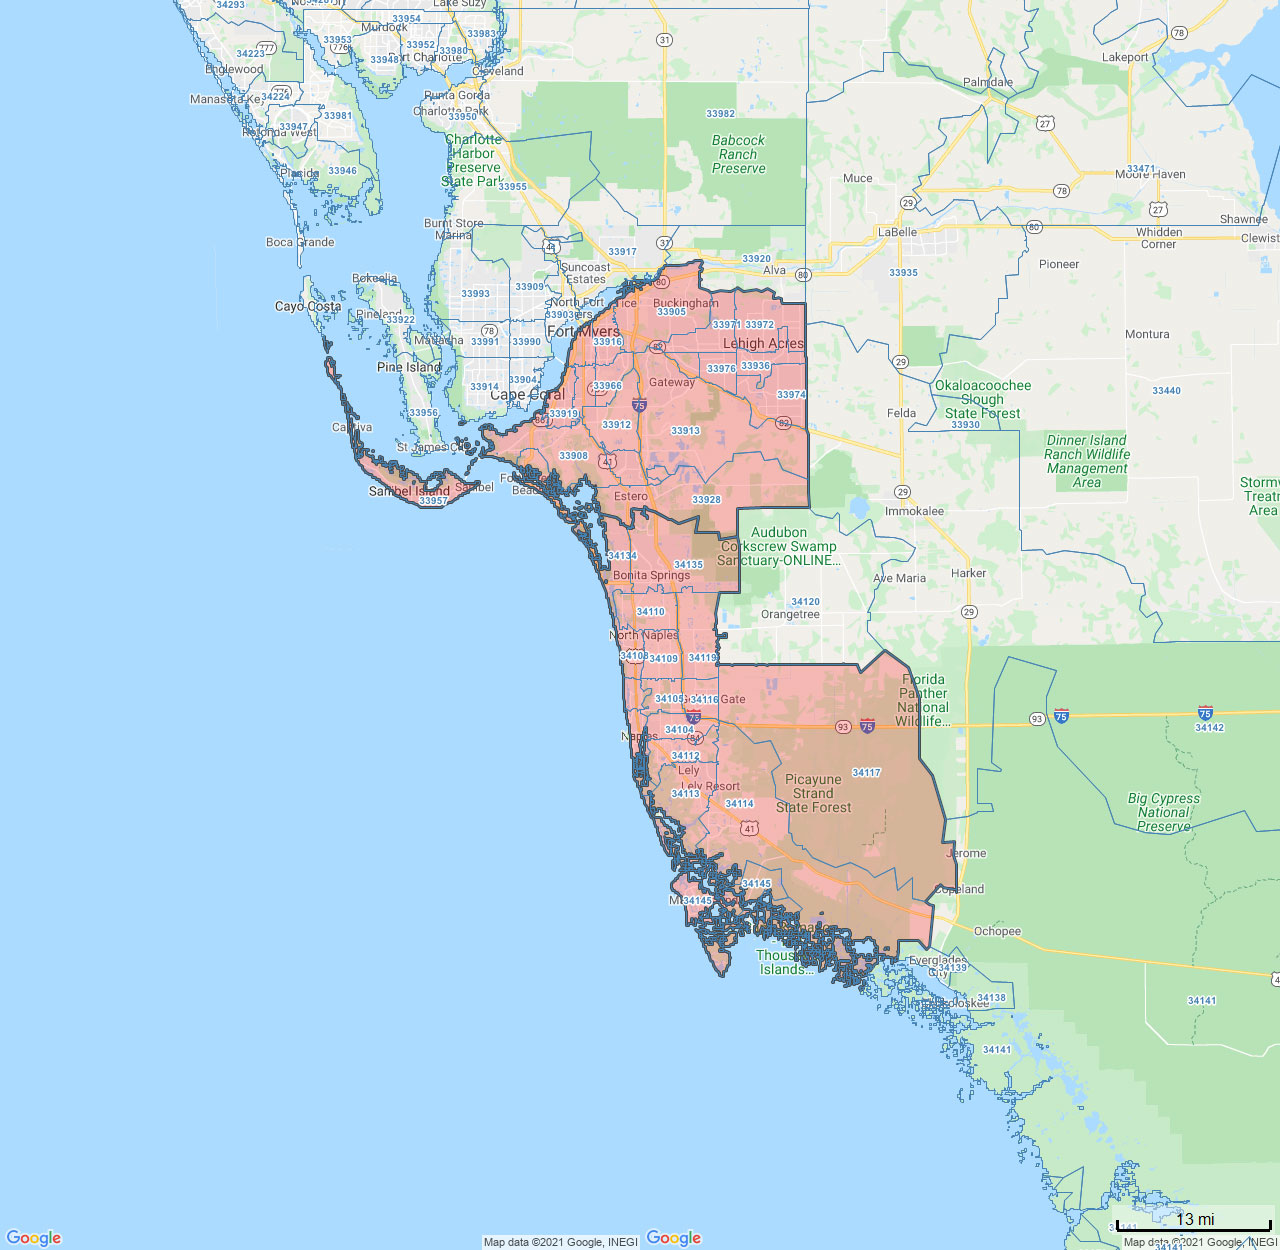 All Dry Services Area Coverage Map for Ft. Myers / Naples, FL